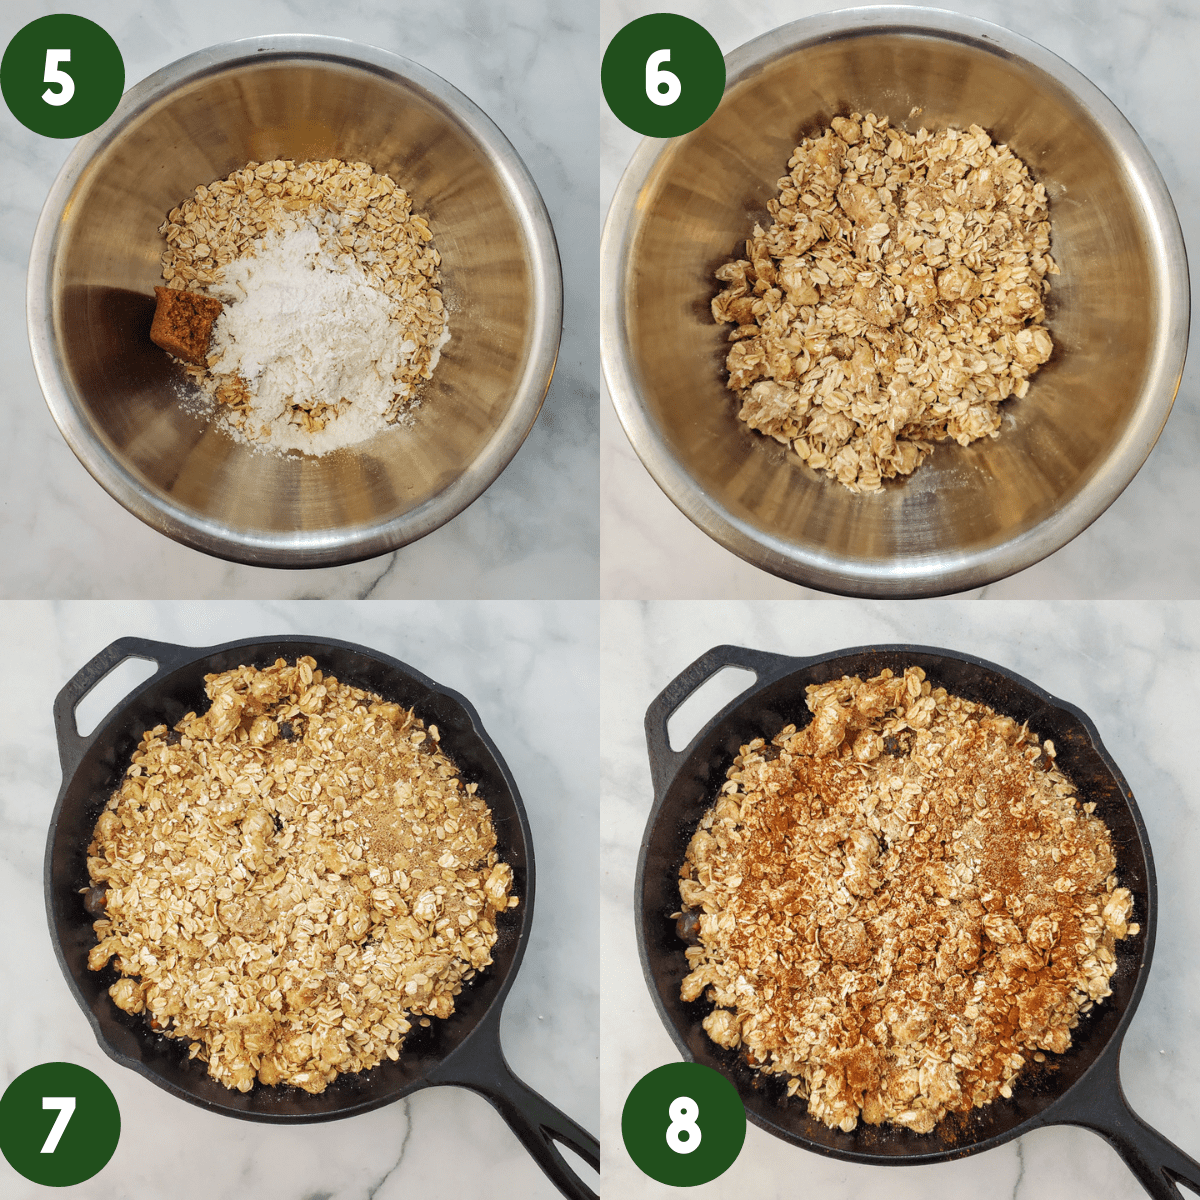 2 by 2 photo collage with steps 5 through 8 labeled. Step 5) Topping ingredients in mixing bowl over butter. Step 6) Topping is mixed together in mixing bowl. Step 7) Topping is placed on berry mixture in cast iron pan. Step 8) Cinnamon is sprinkled over oat topping in cast iron skillet.